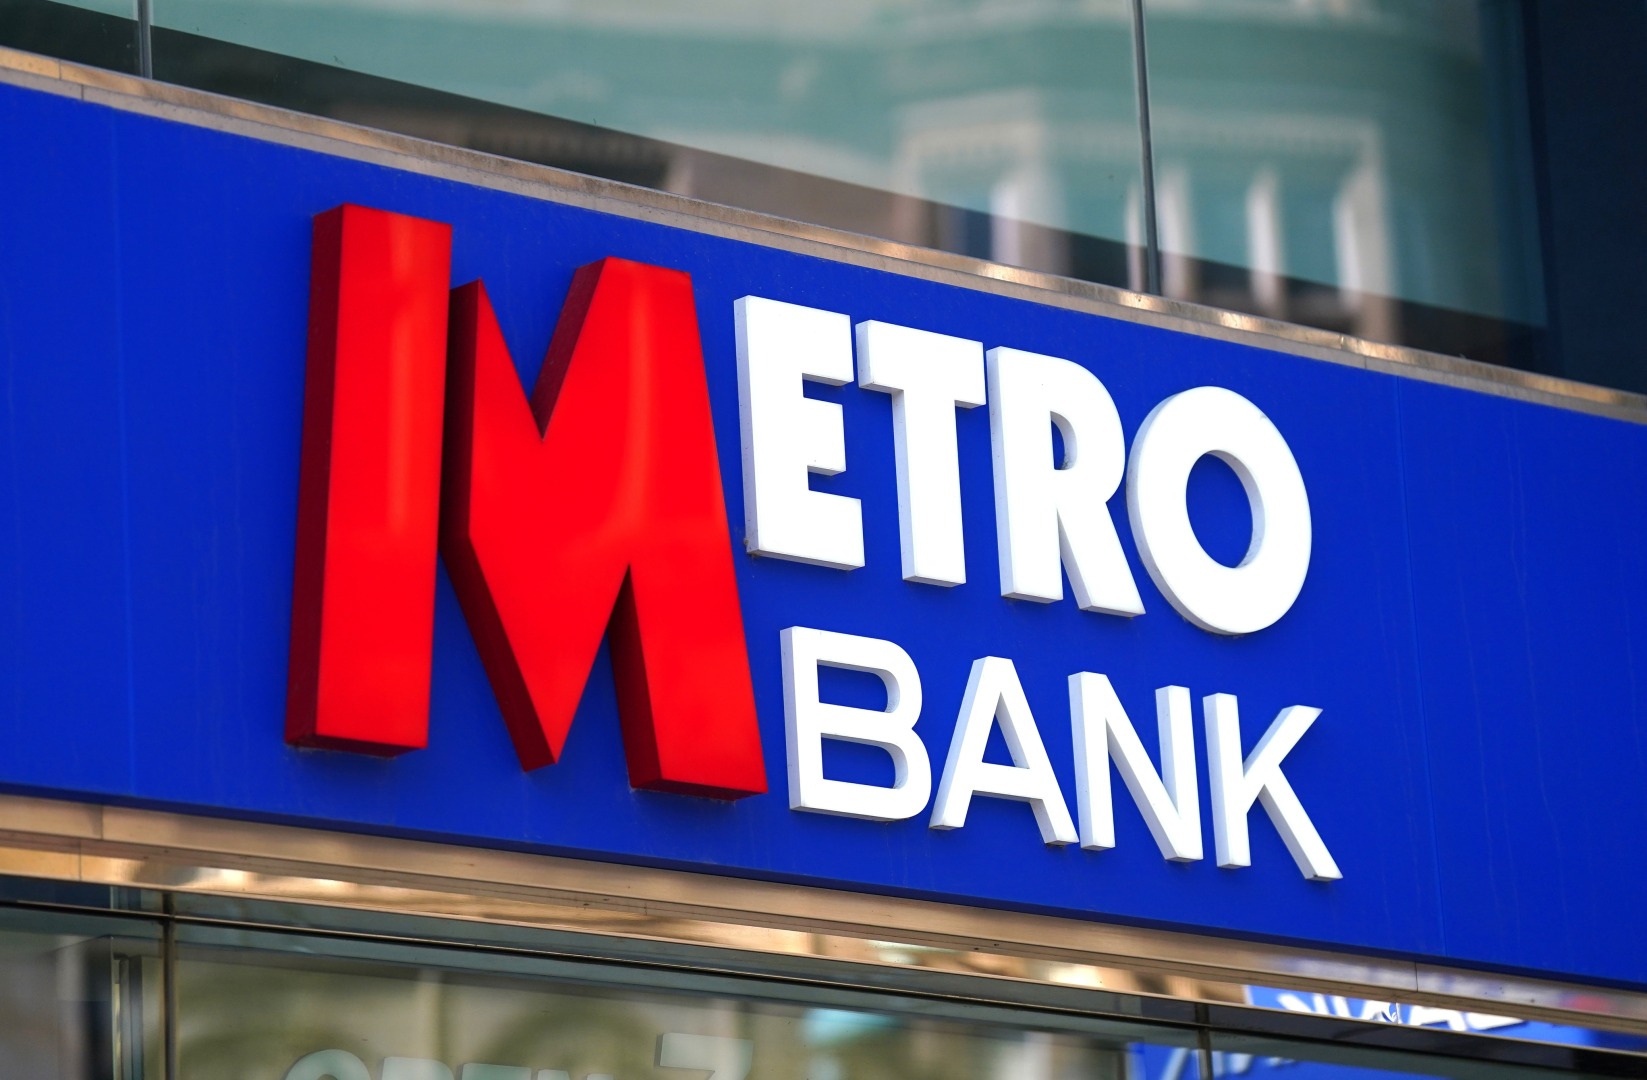 Metro Bank Secures Its Future with £325 Million Rescue Funding Deal